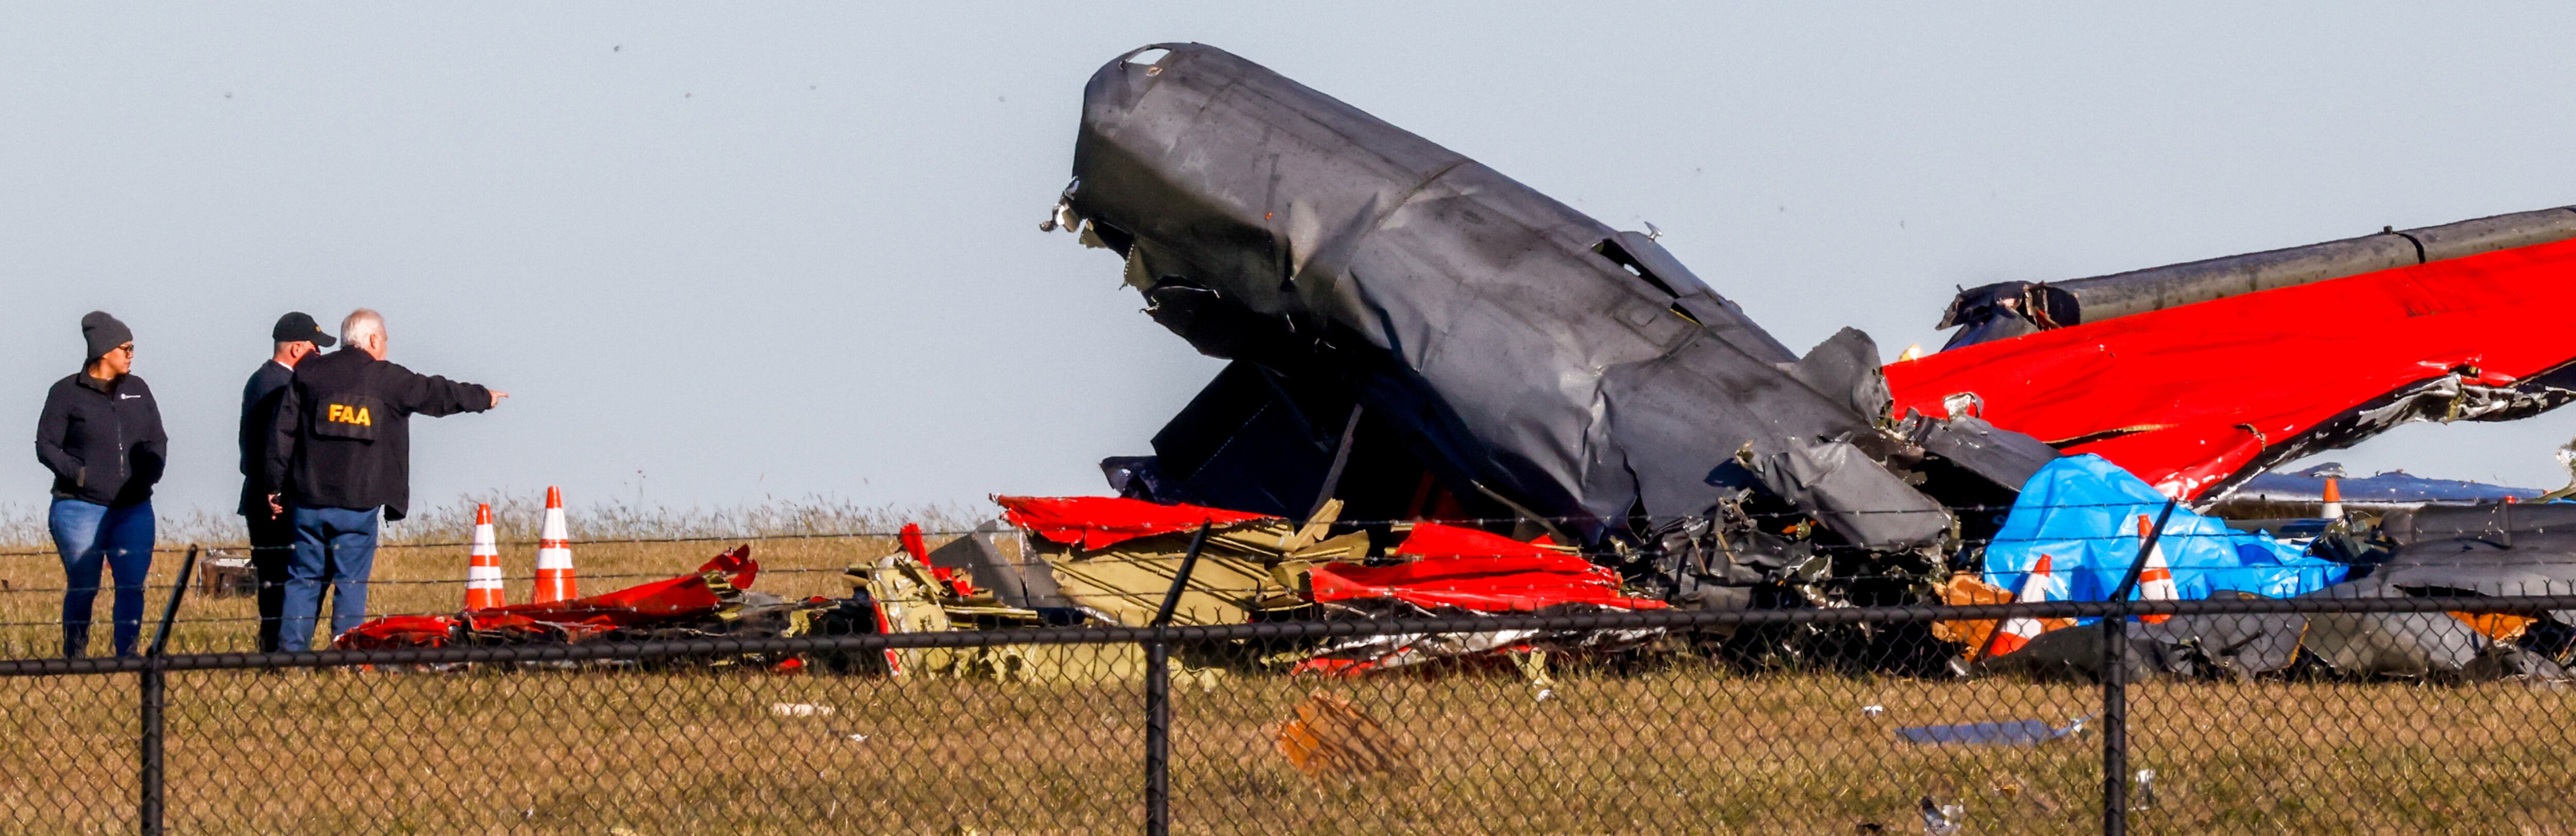 Officials, including those from the Federal Aviation Administration, survey damage from a...